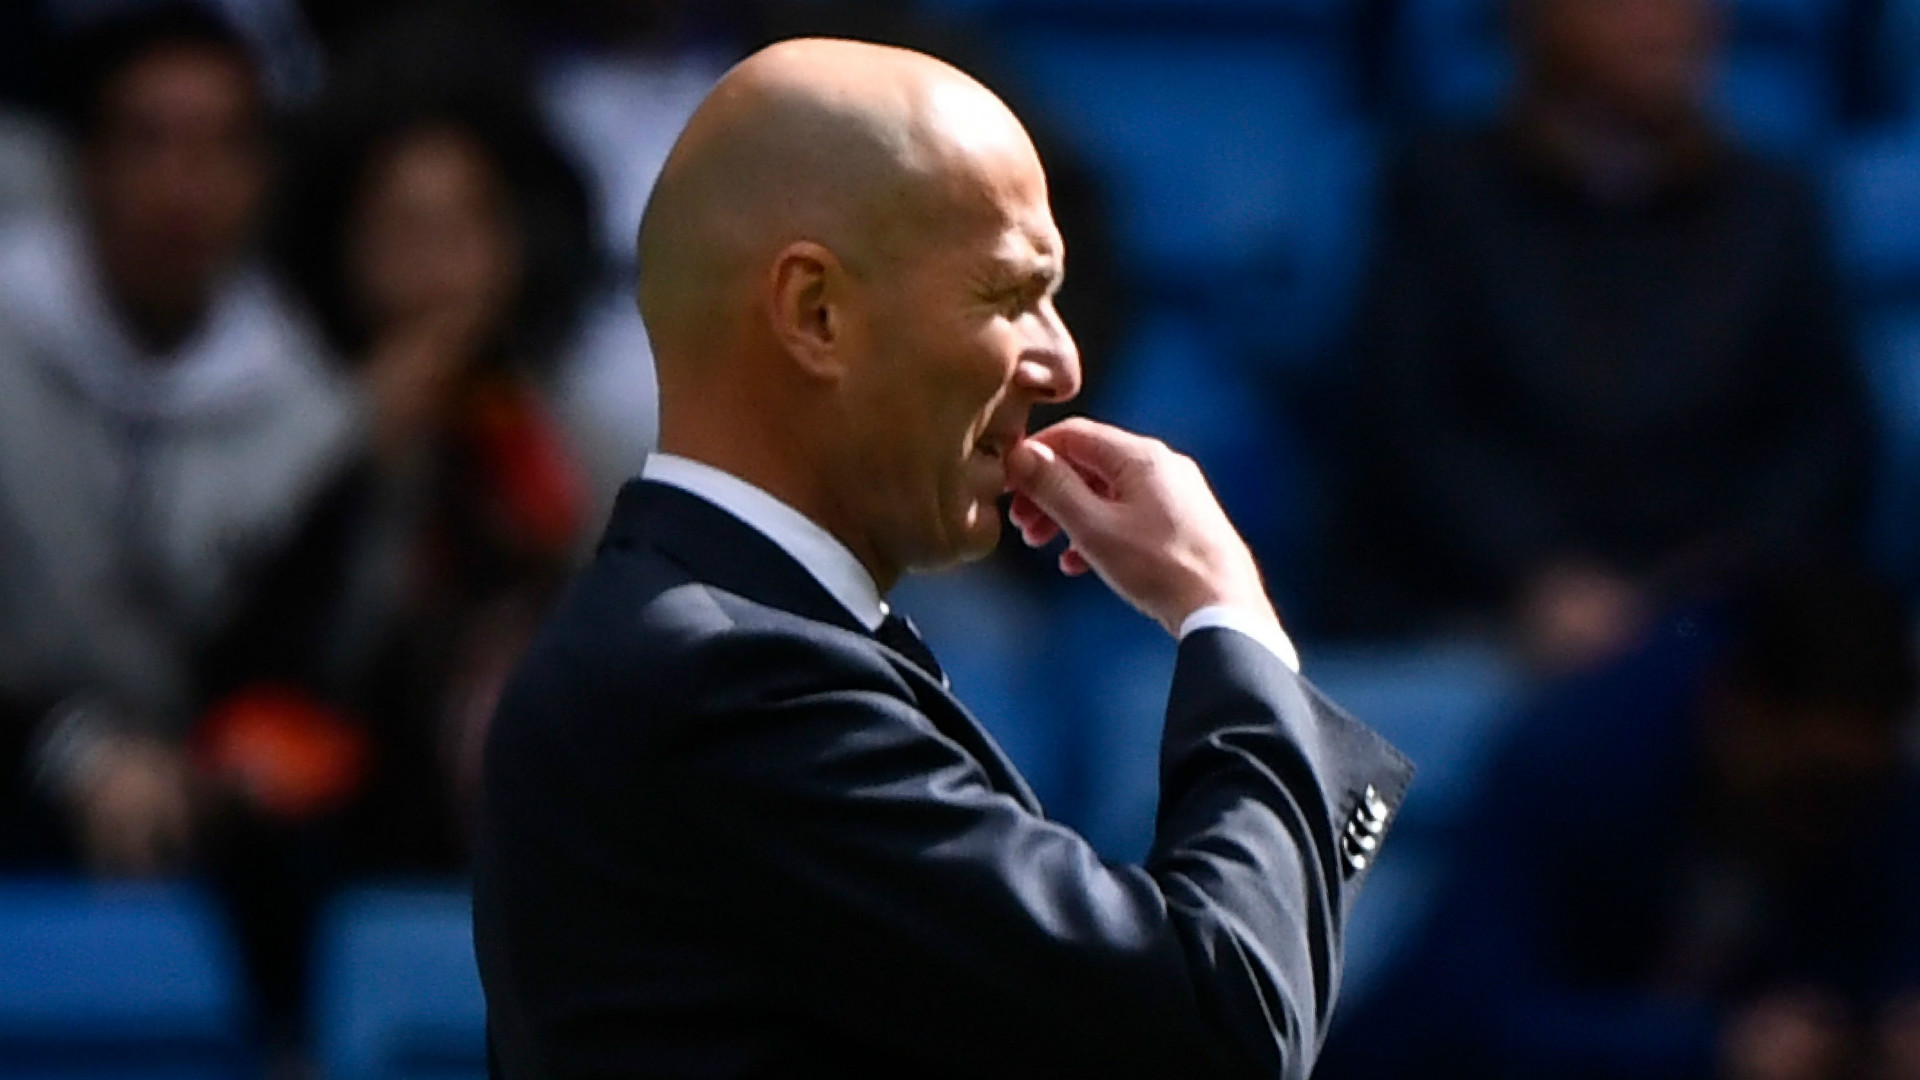 Zidane leaves Real Madrid training camp due to personal reasons